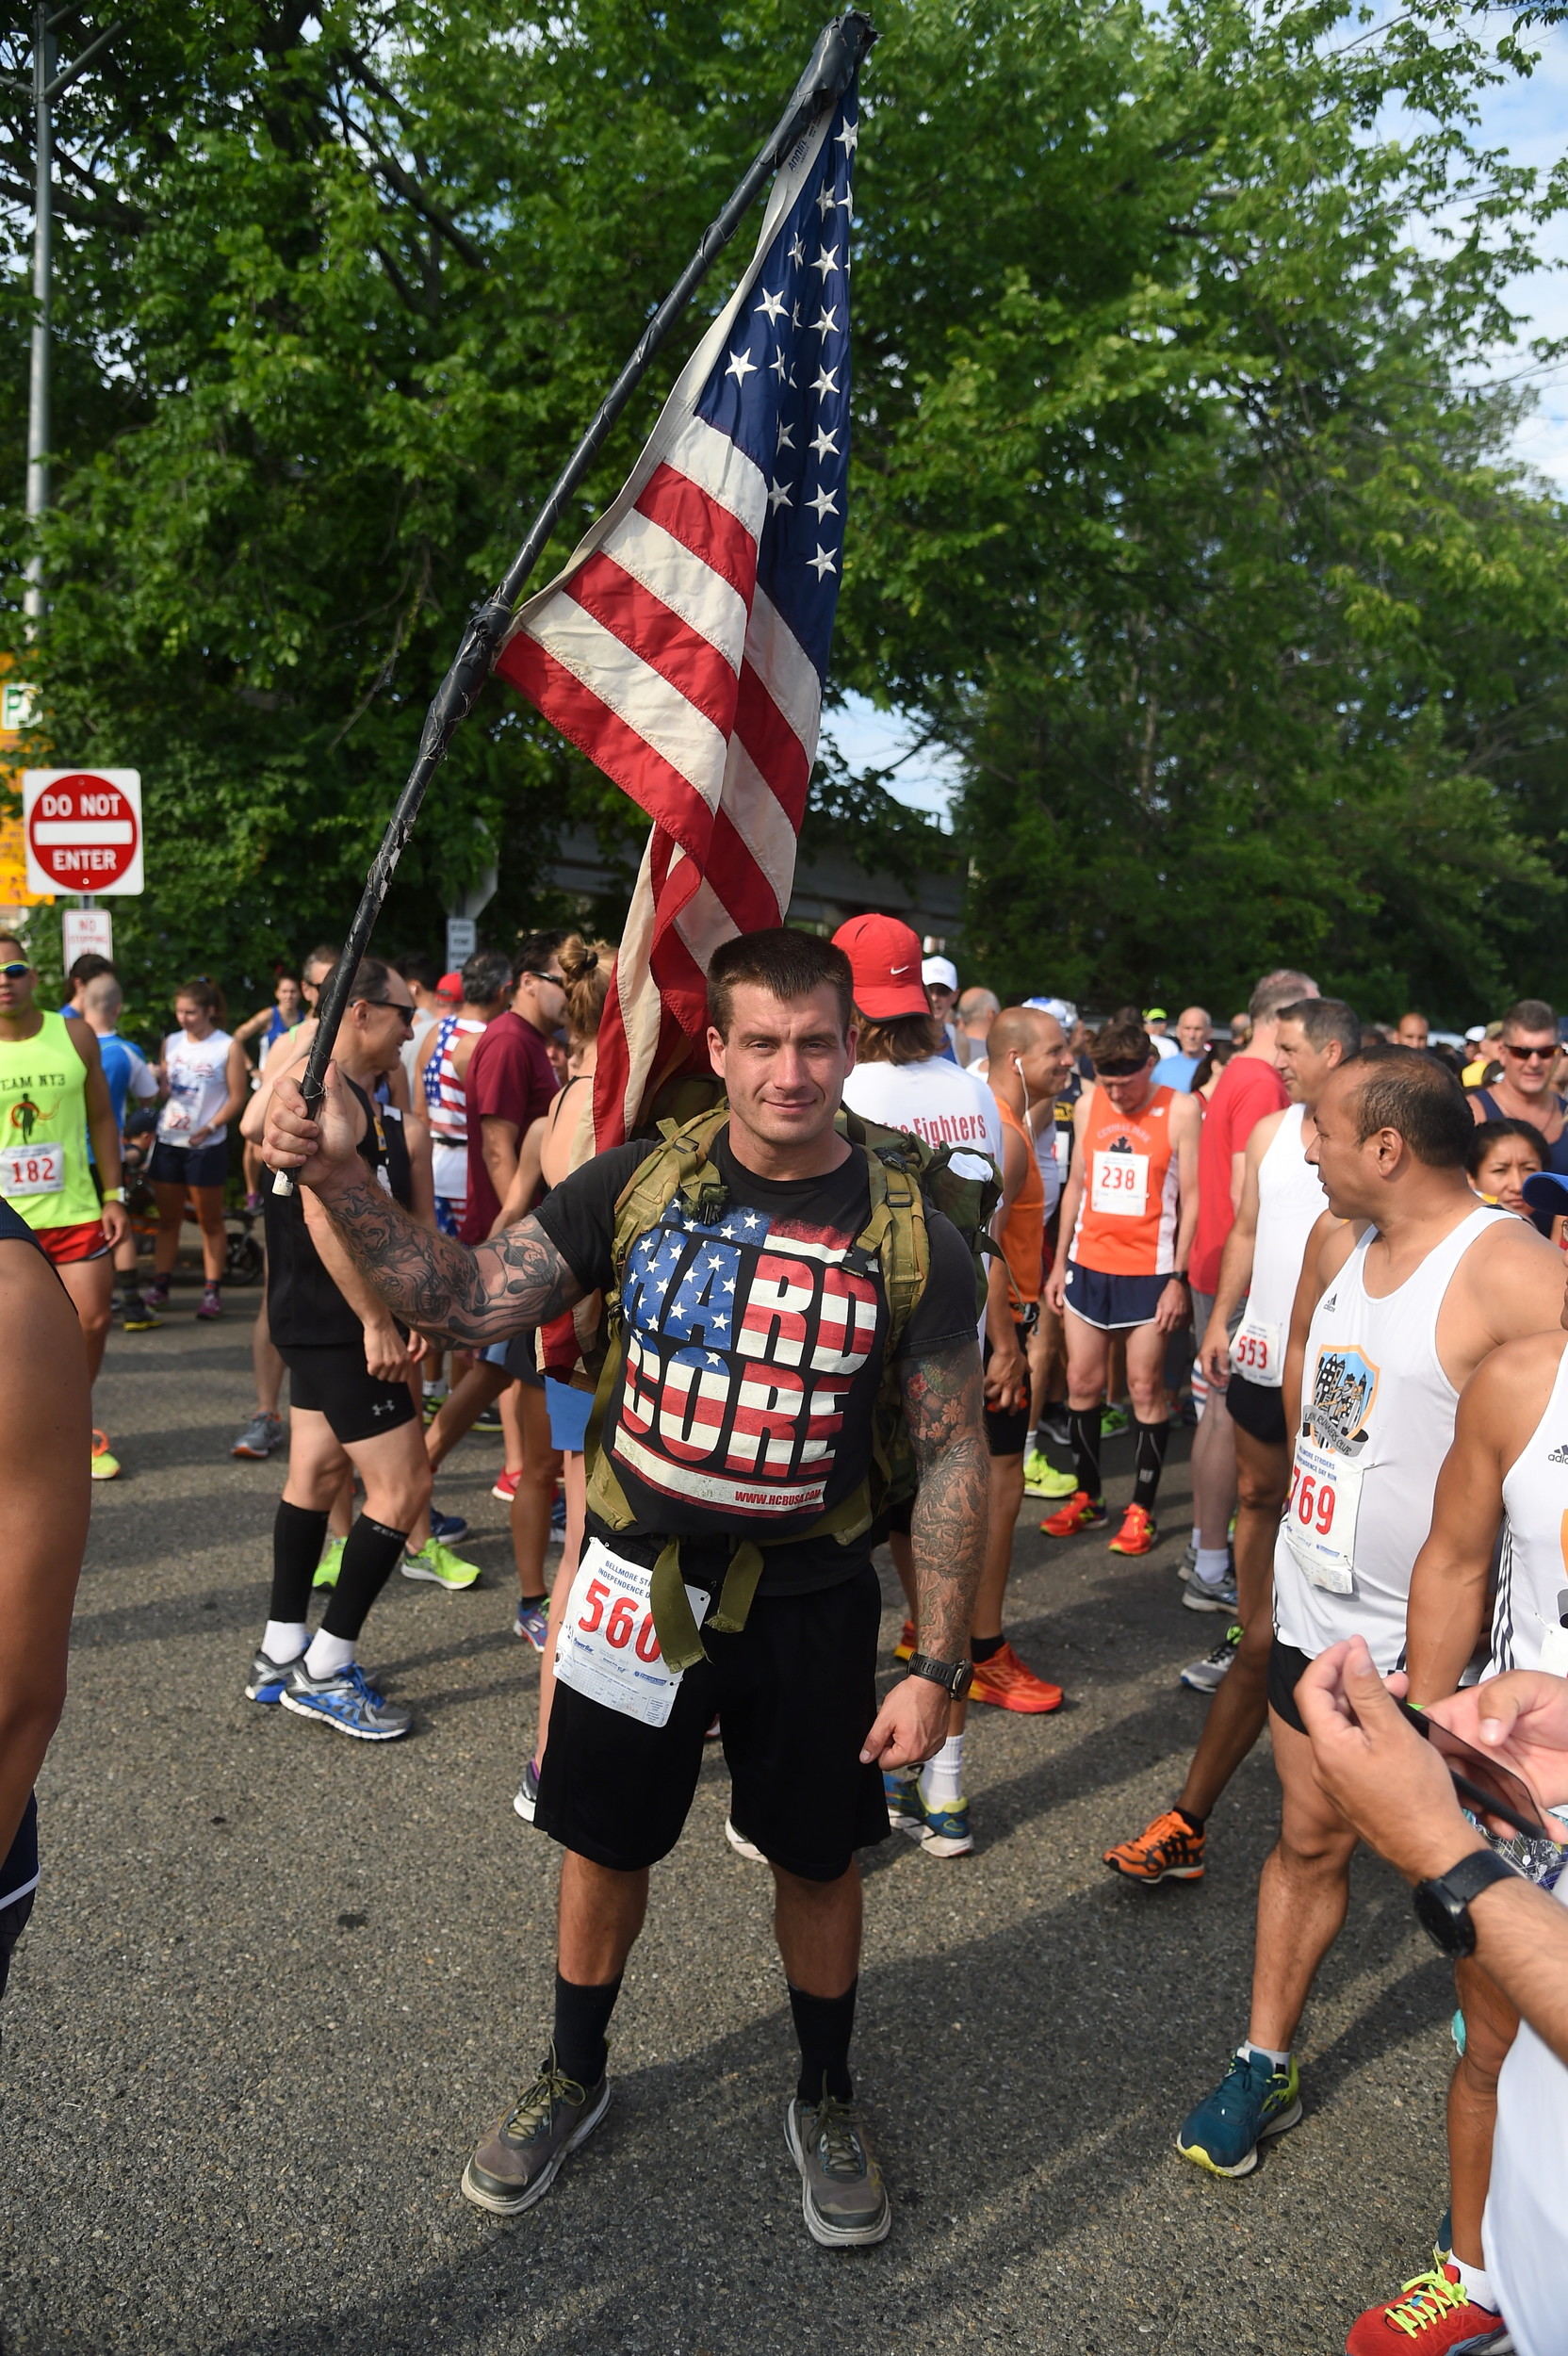 Billy Richards, a U.S. Marine from Islip, hoisted the flag before the kick-off of the Independence Day run.